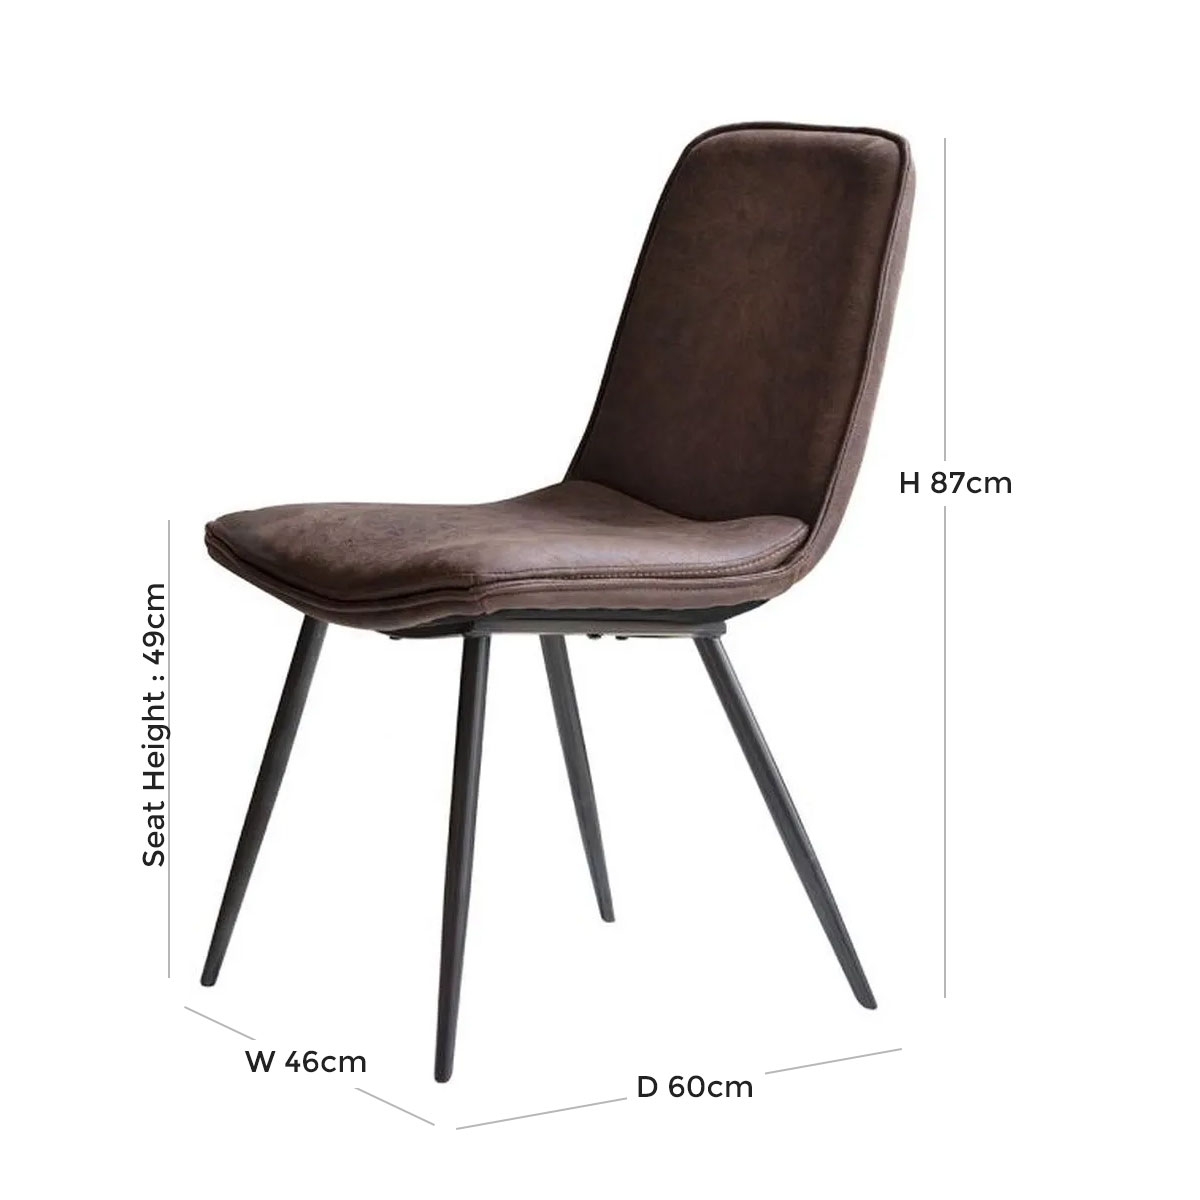 Clearance - Newton Brown Dining Chair (Sold in Pairs) - D20/21/22/29